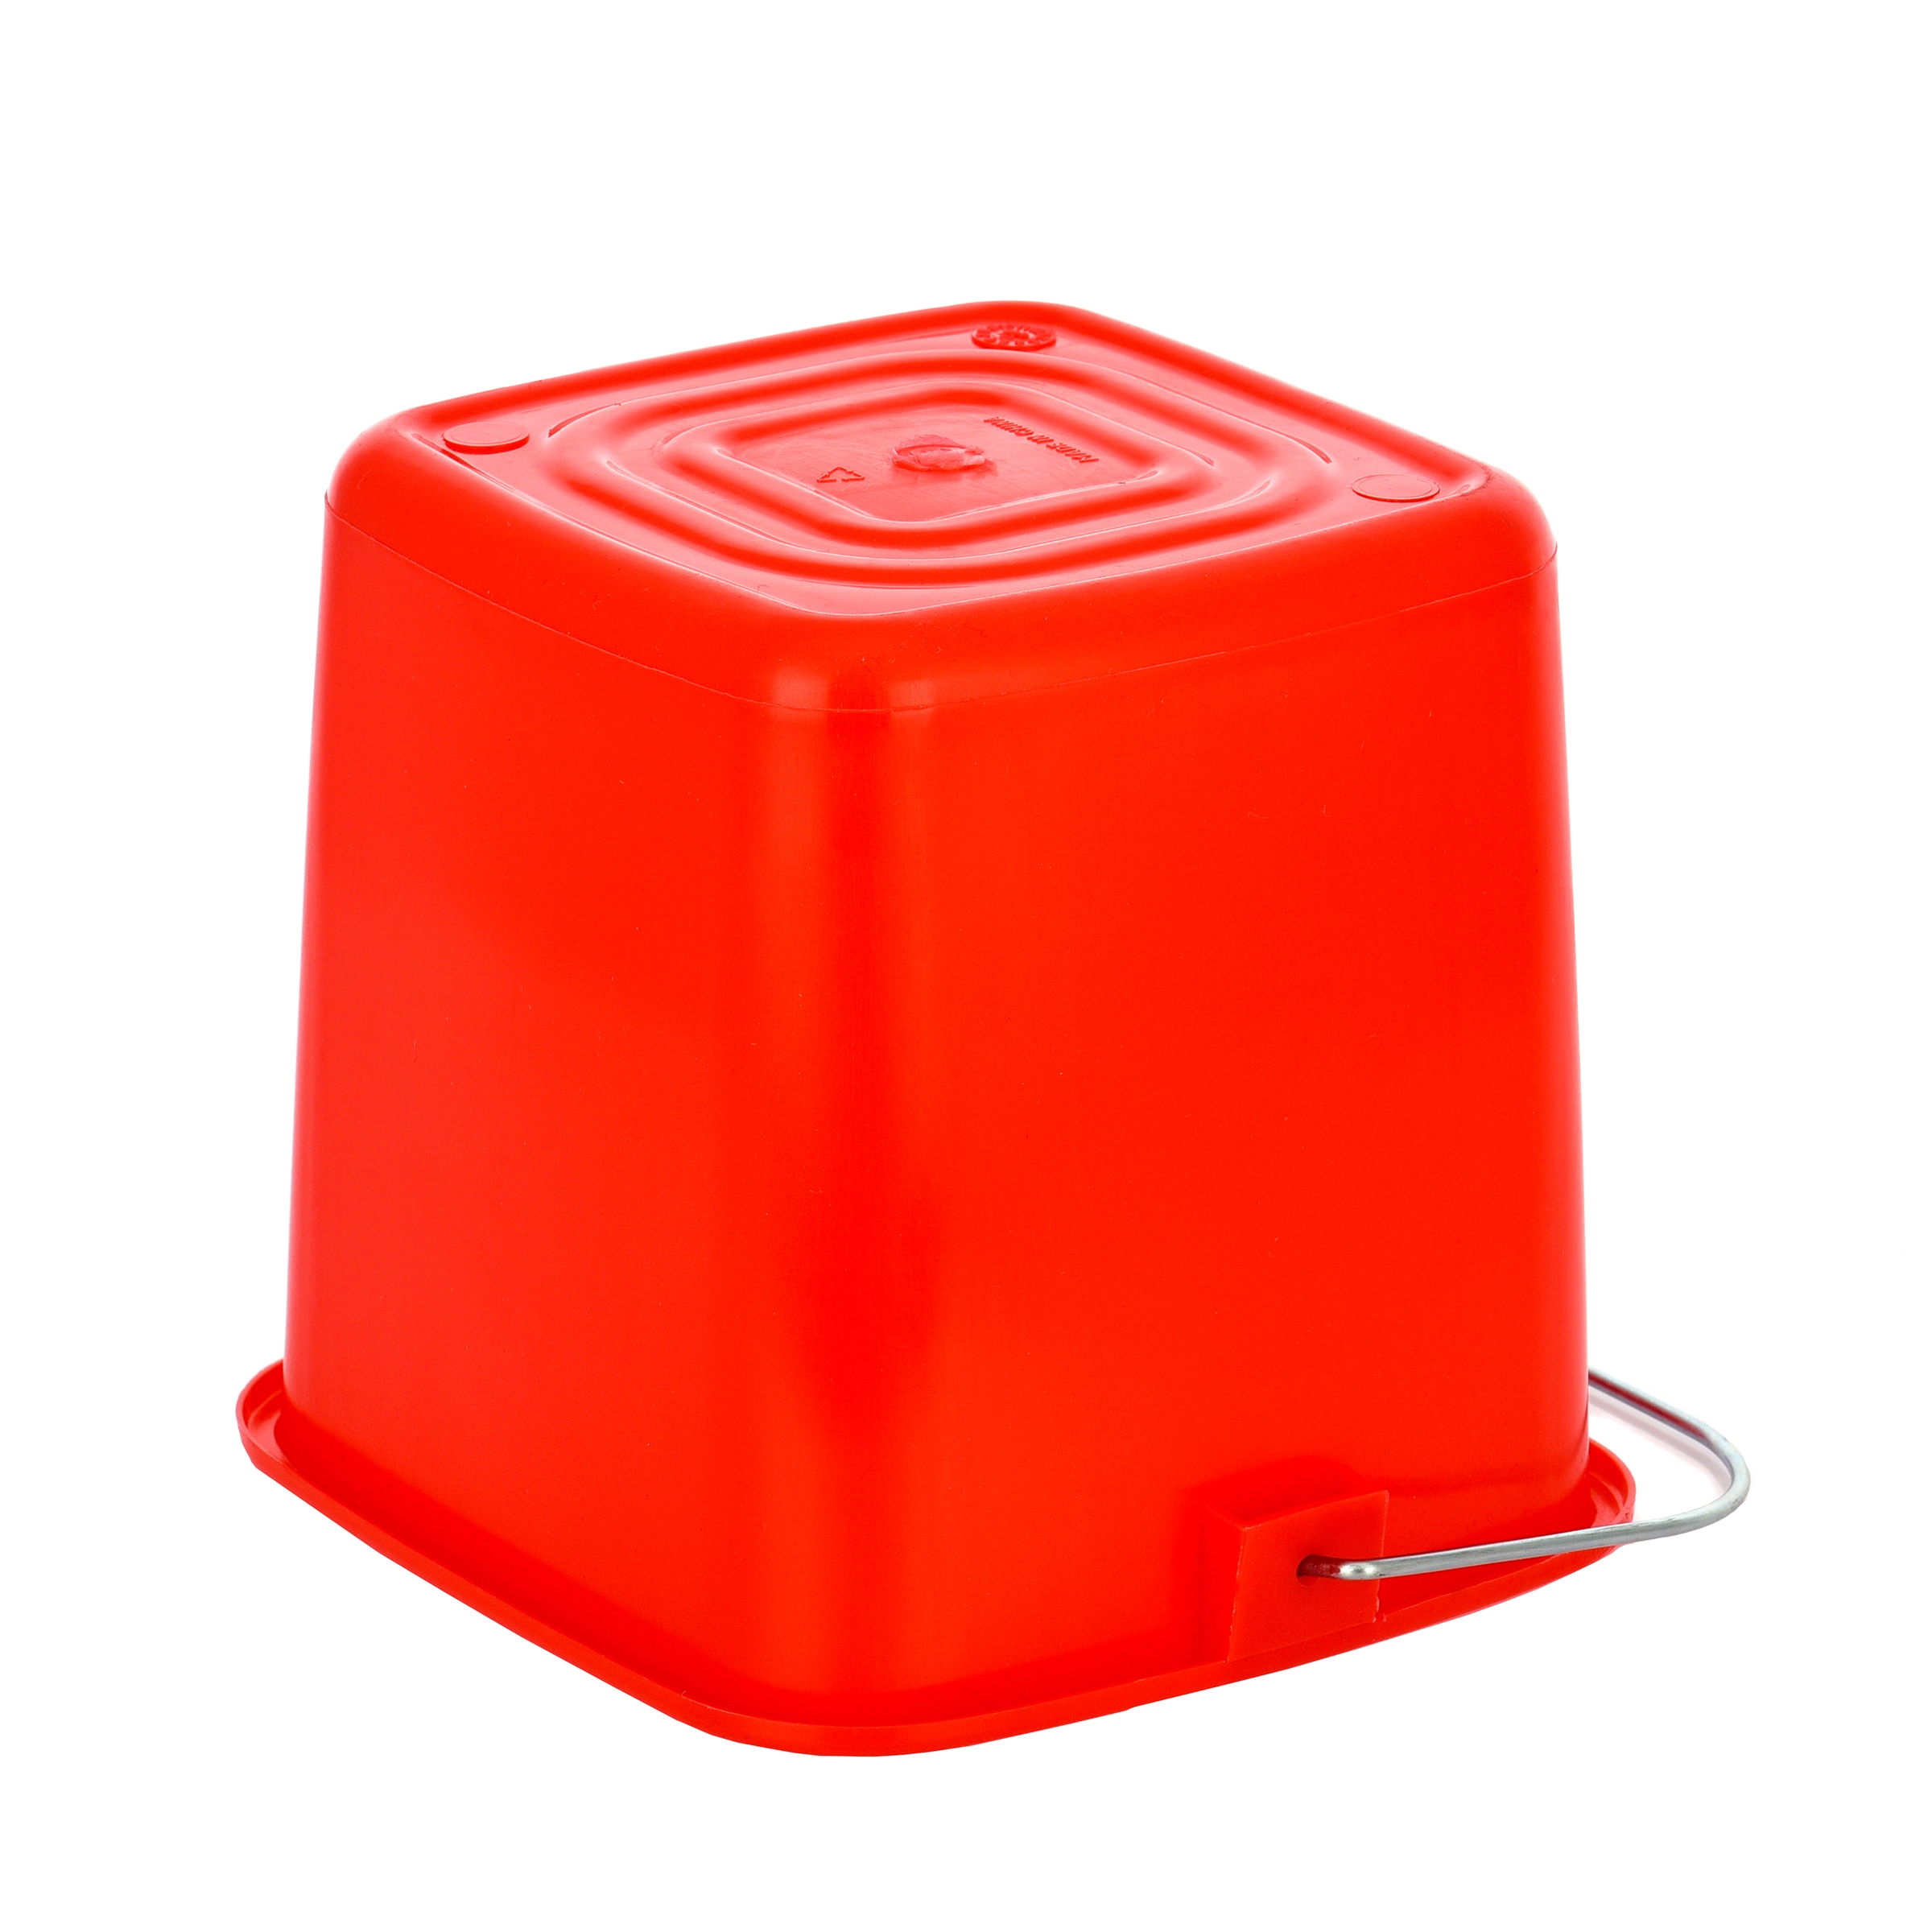 NeosKon Small Red Bucket - 3 Quart Cleaning Pail - Set of 3 Square  Containers, Plastic